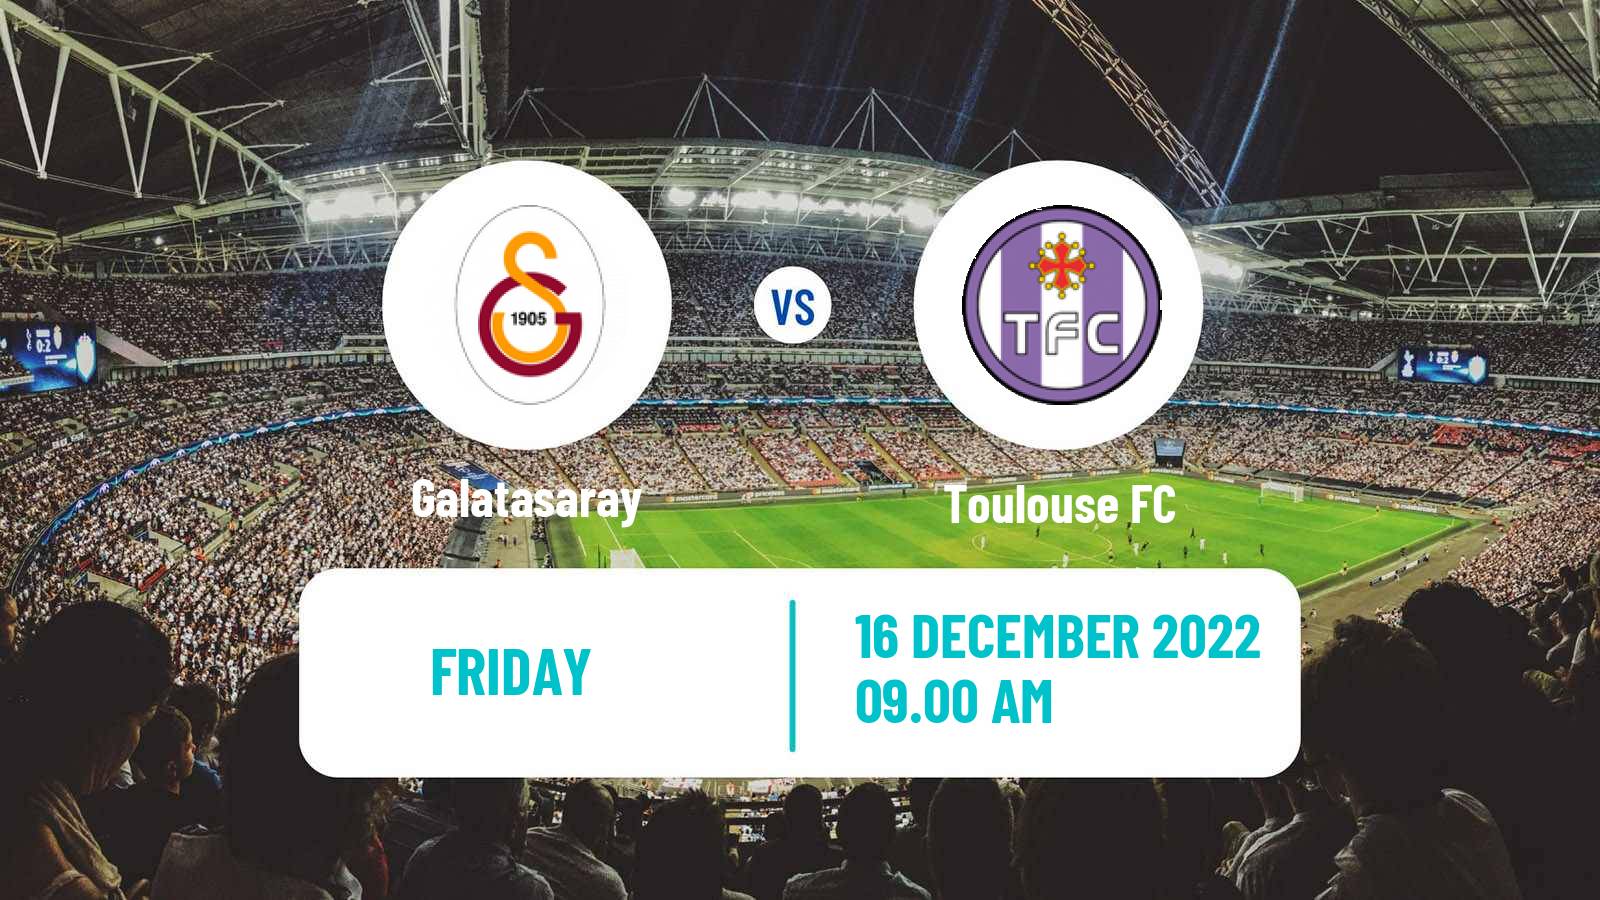 Soccer Club Friendly Galatasaray - Toulouse